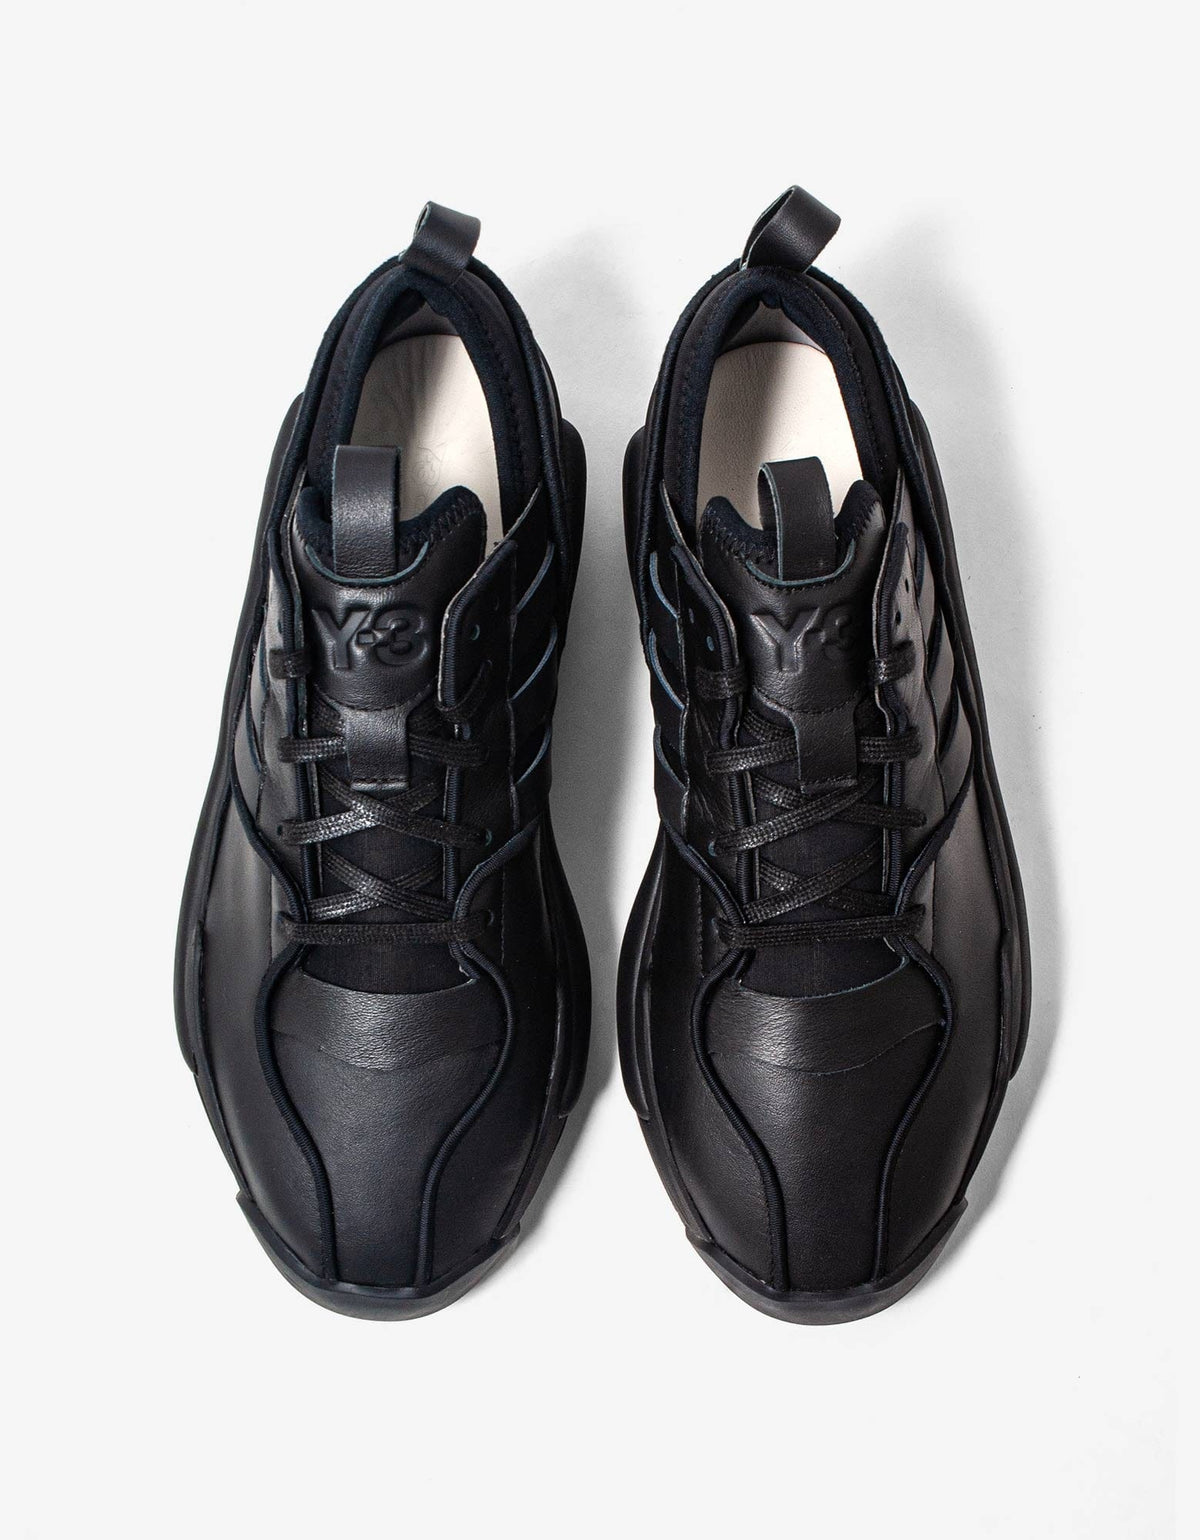 Y-3 Black Rivalry Trainers